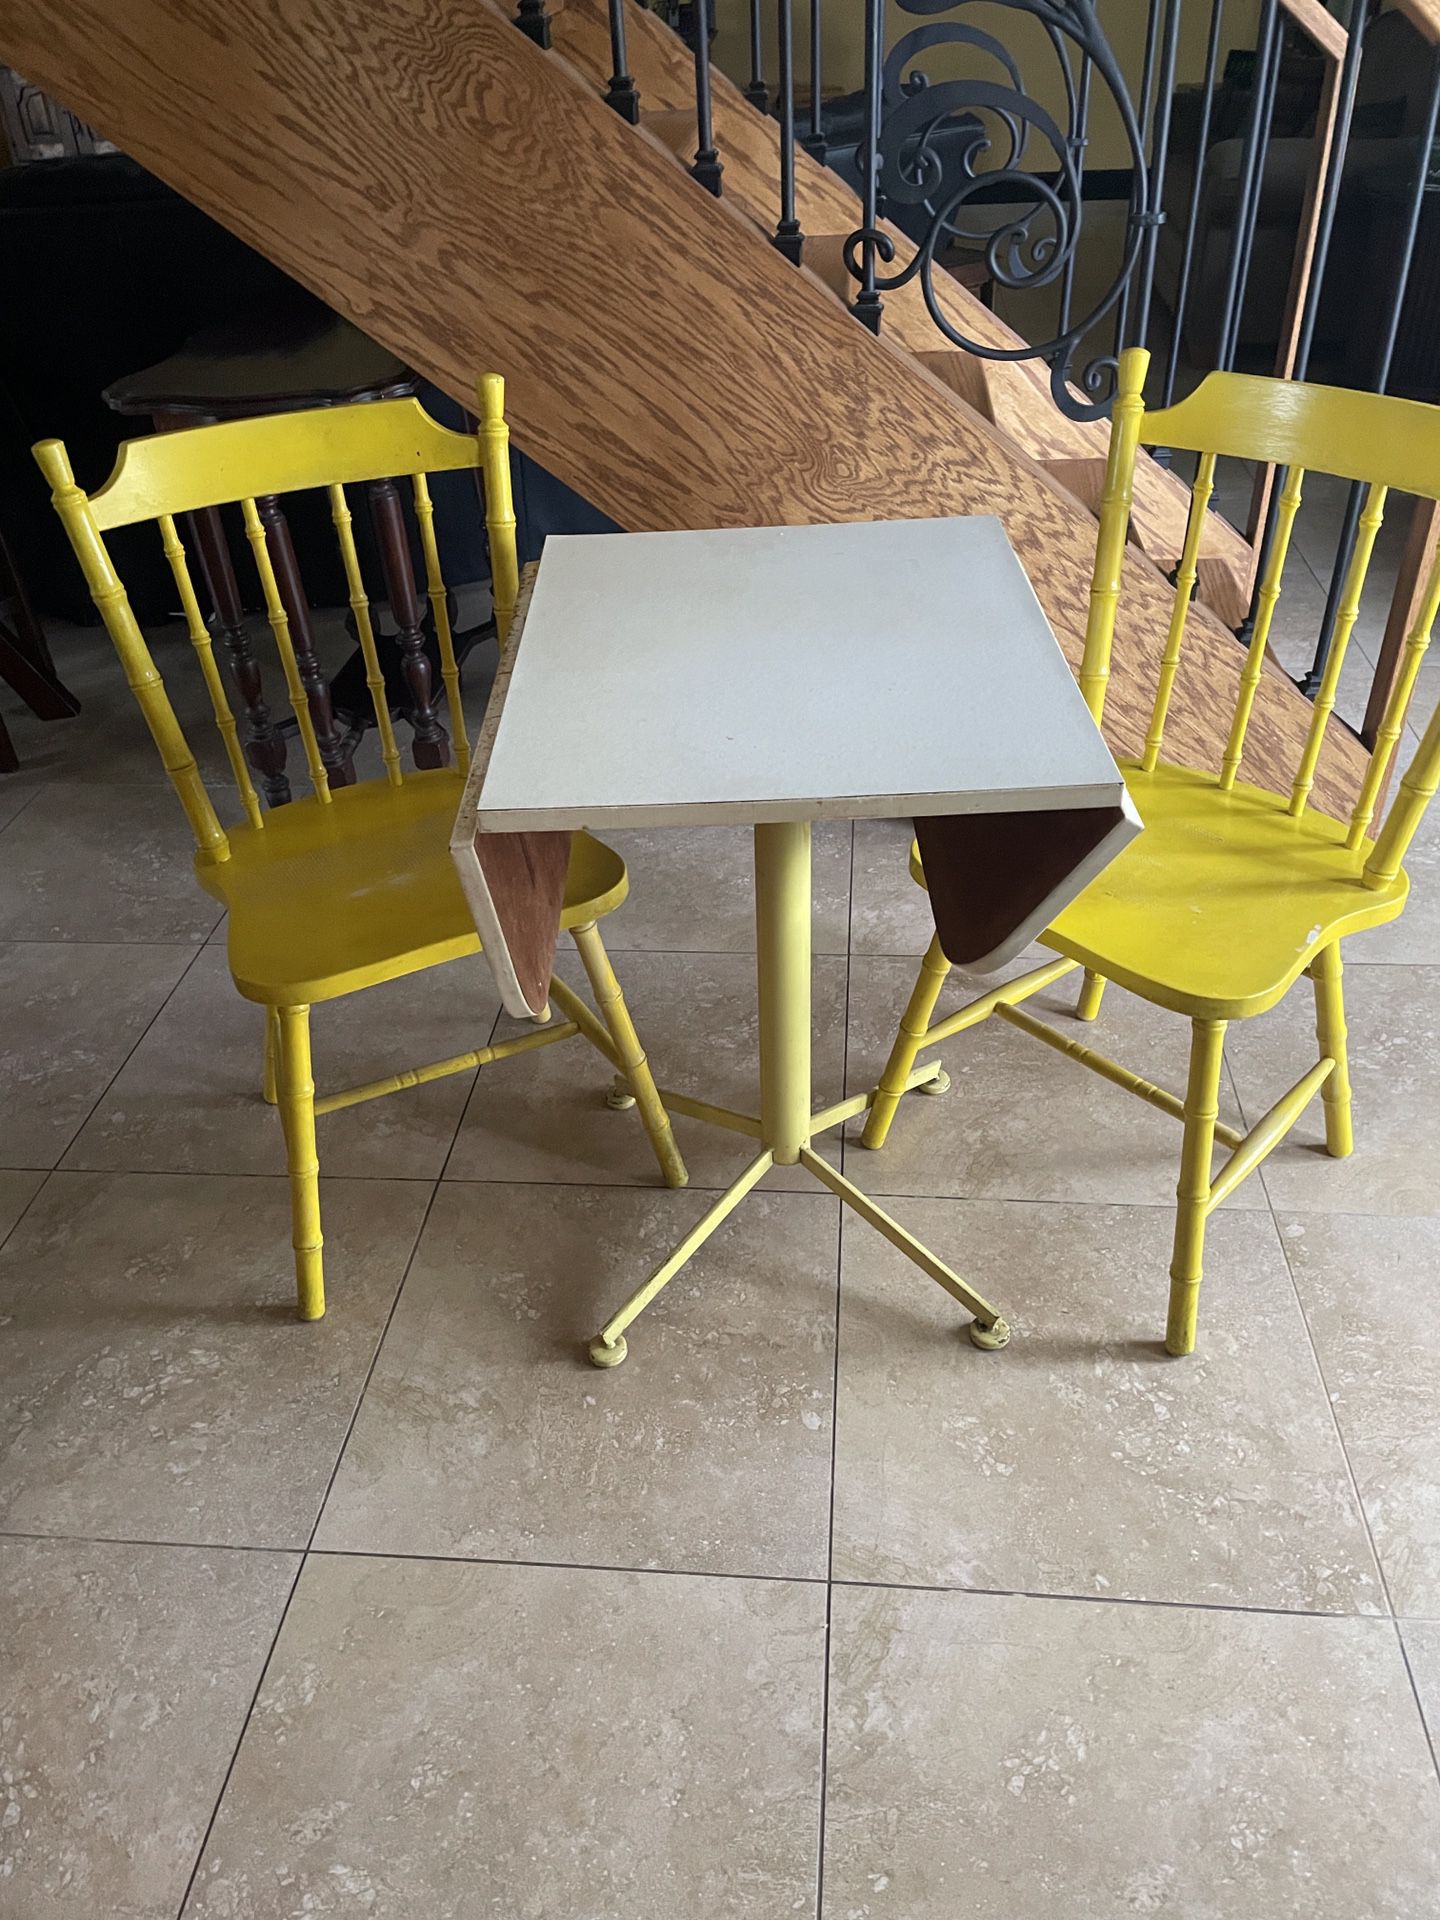 Adorable Vintage Formica Table Ready For Redo